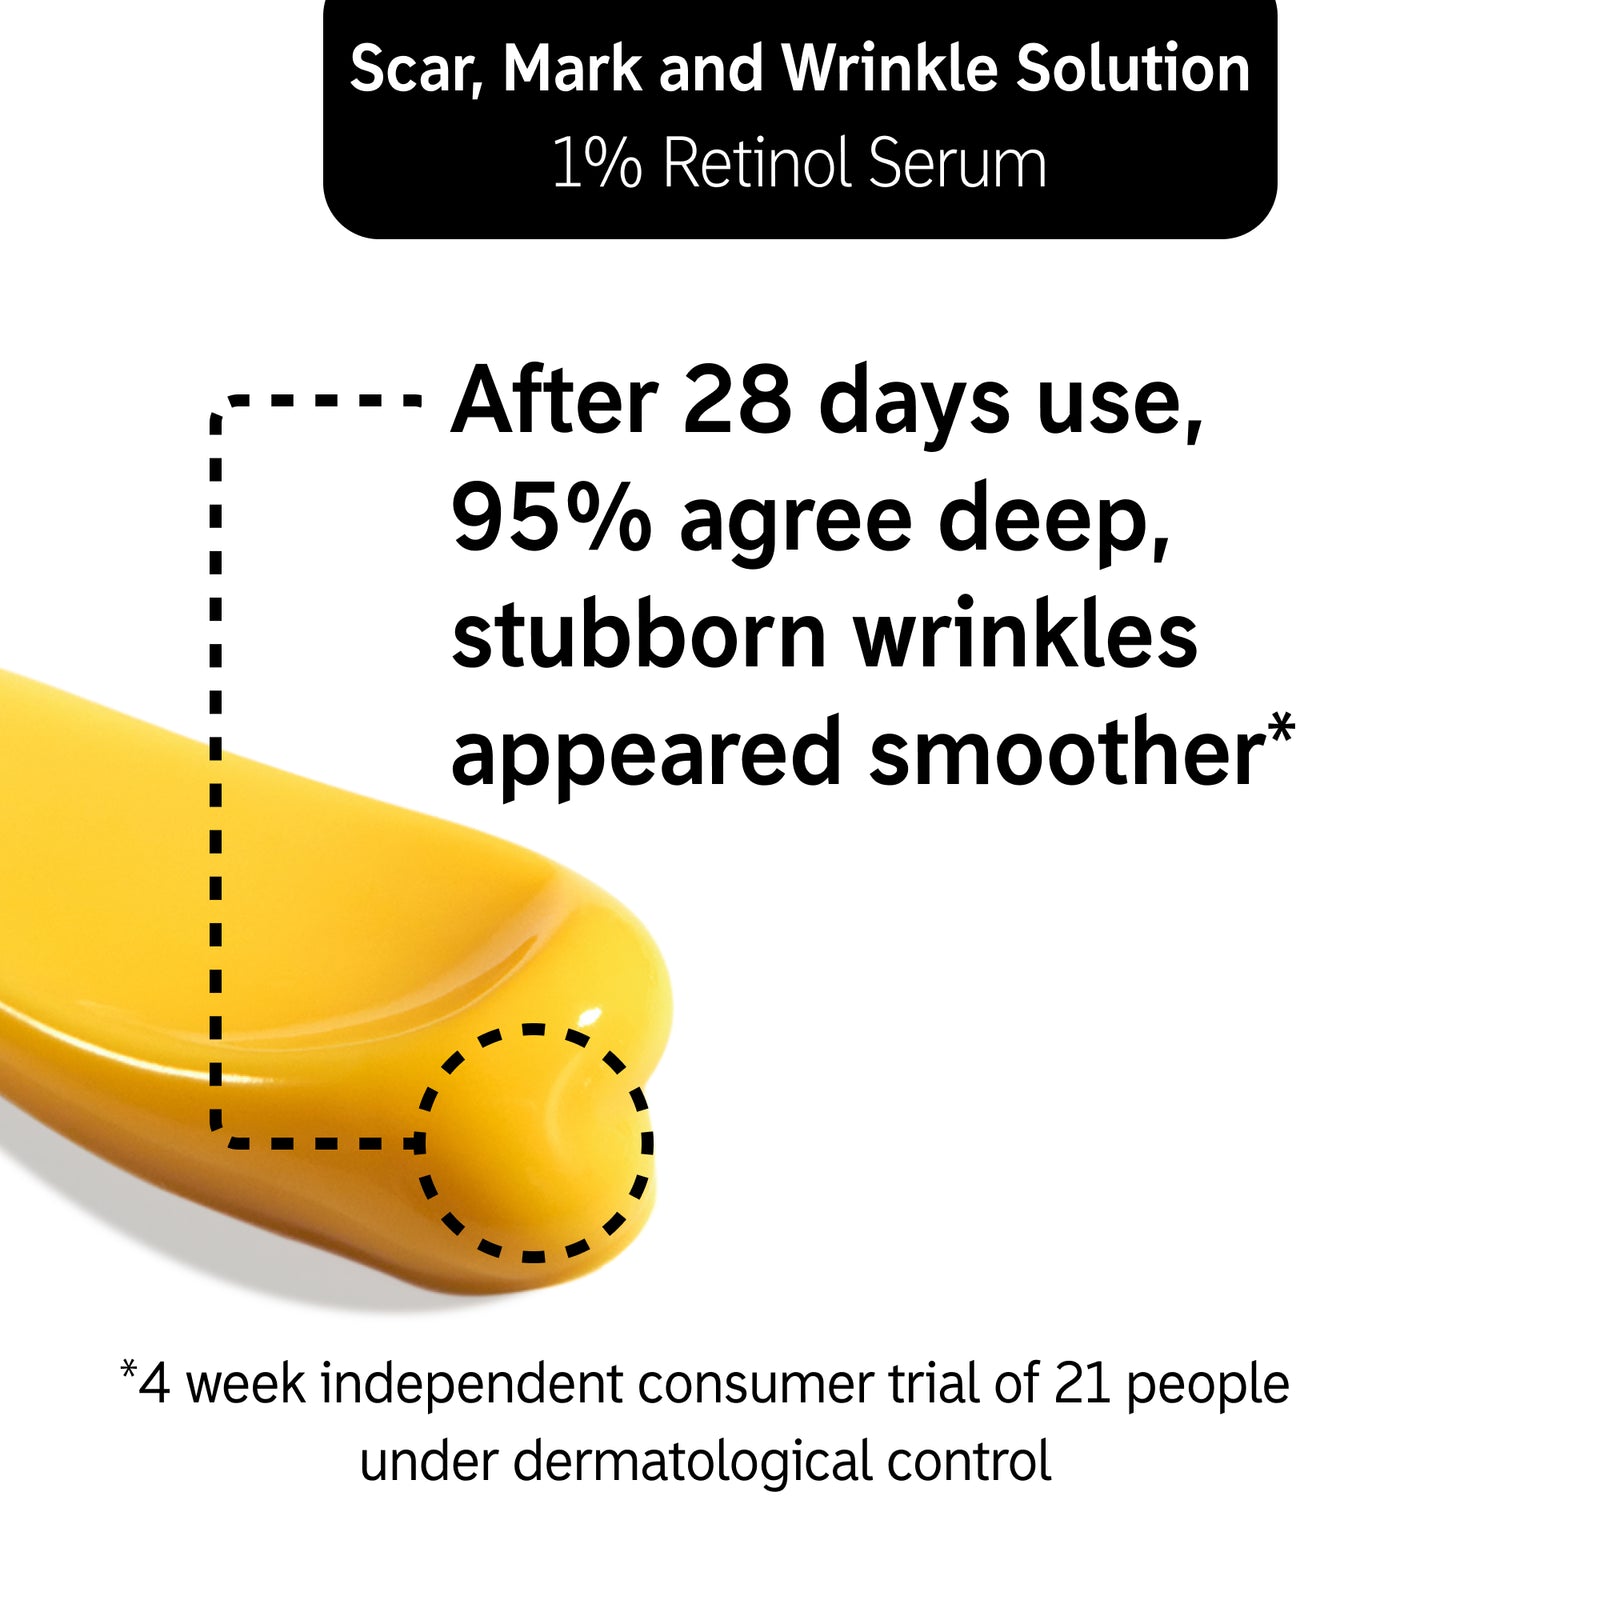 Key claim from customer trial using Scar Mark & Wrinkle Solution for 4 weeks